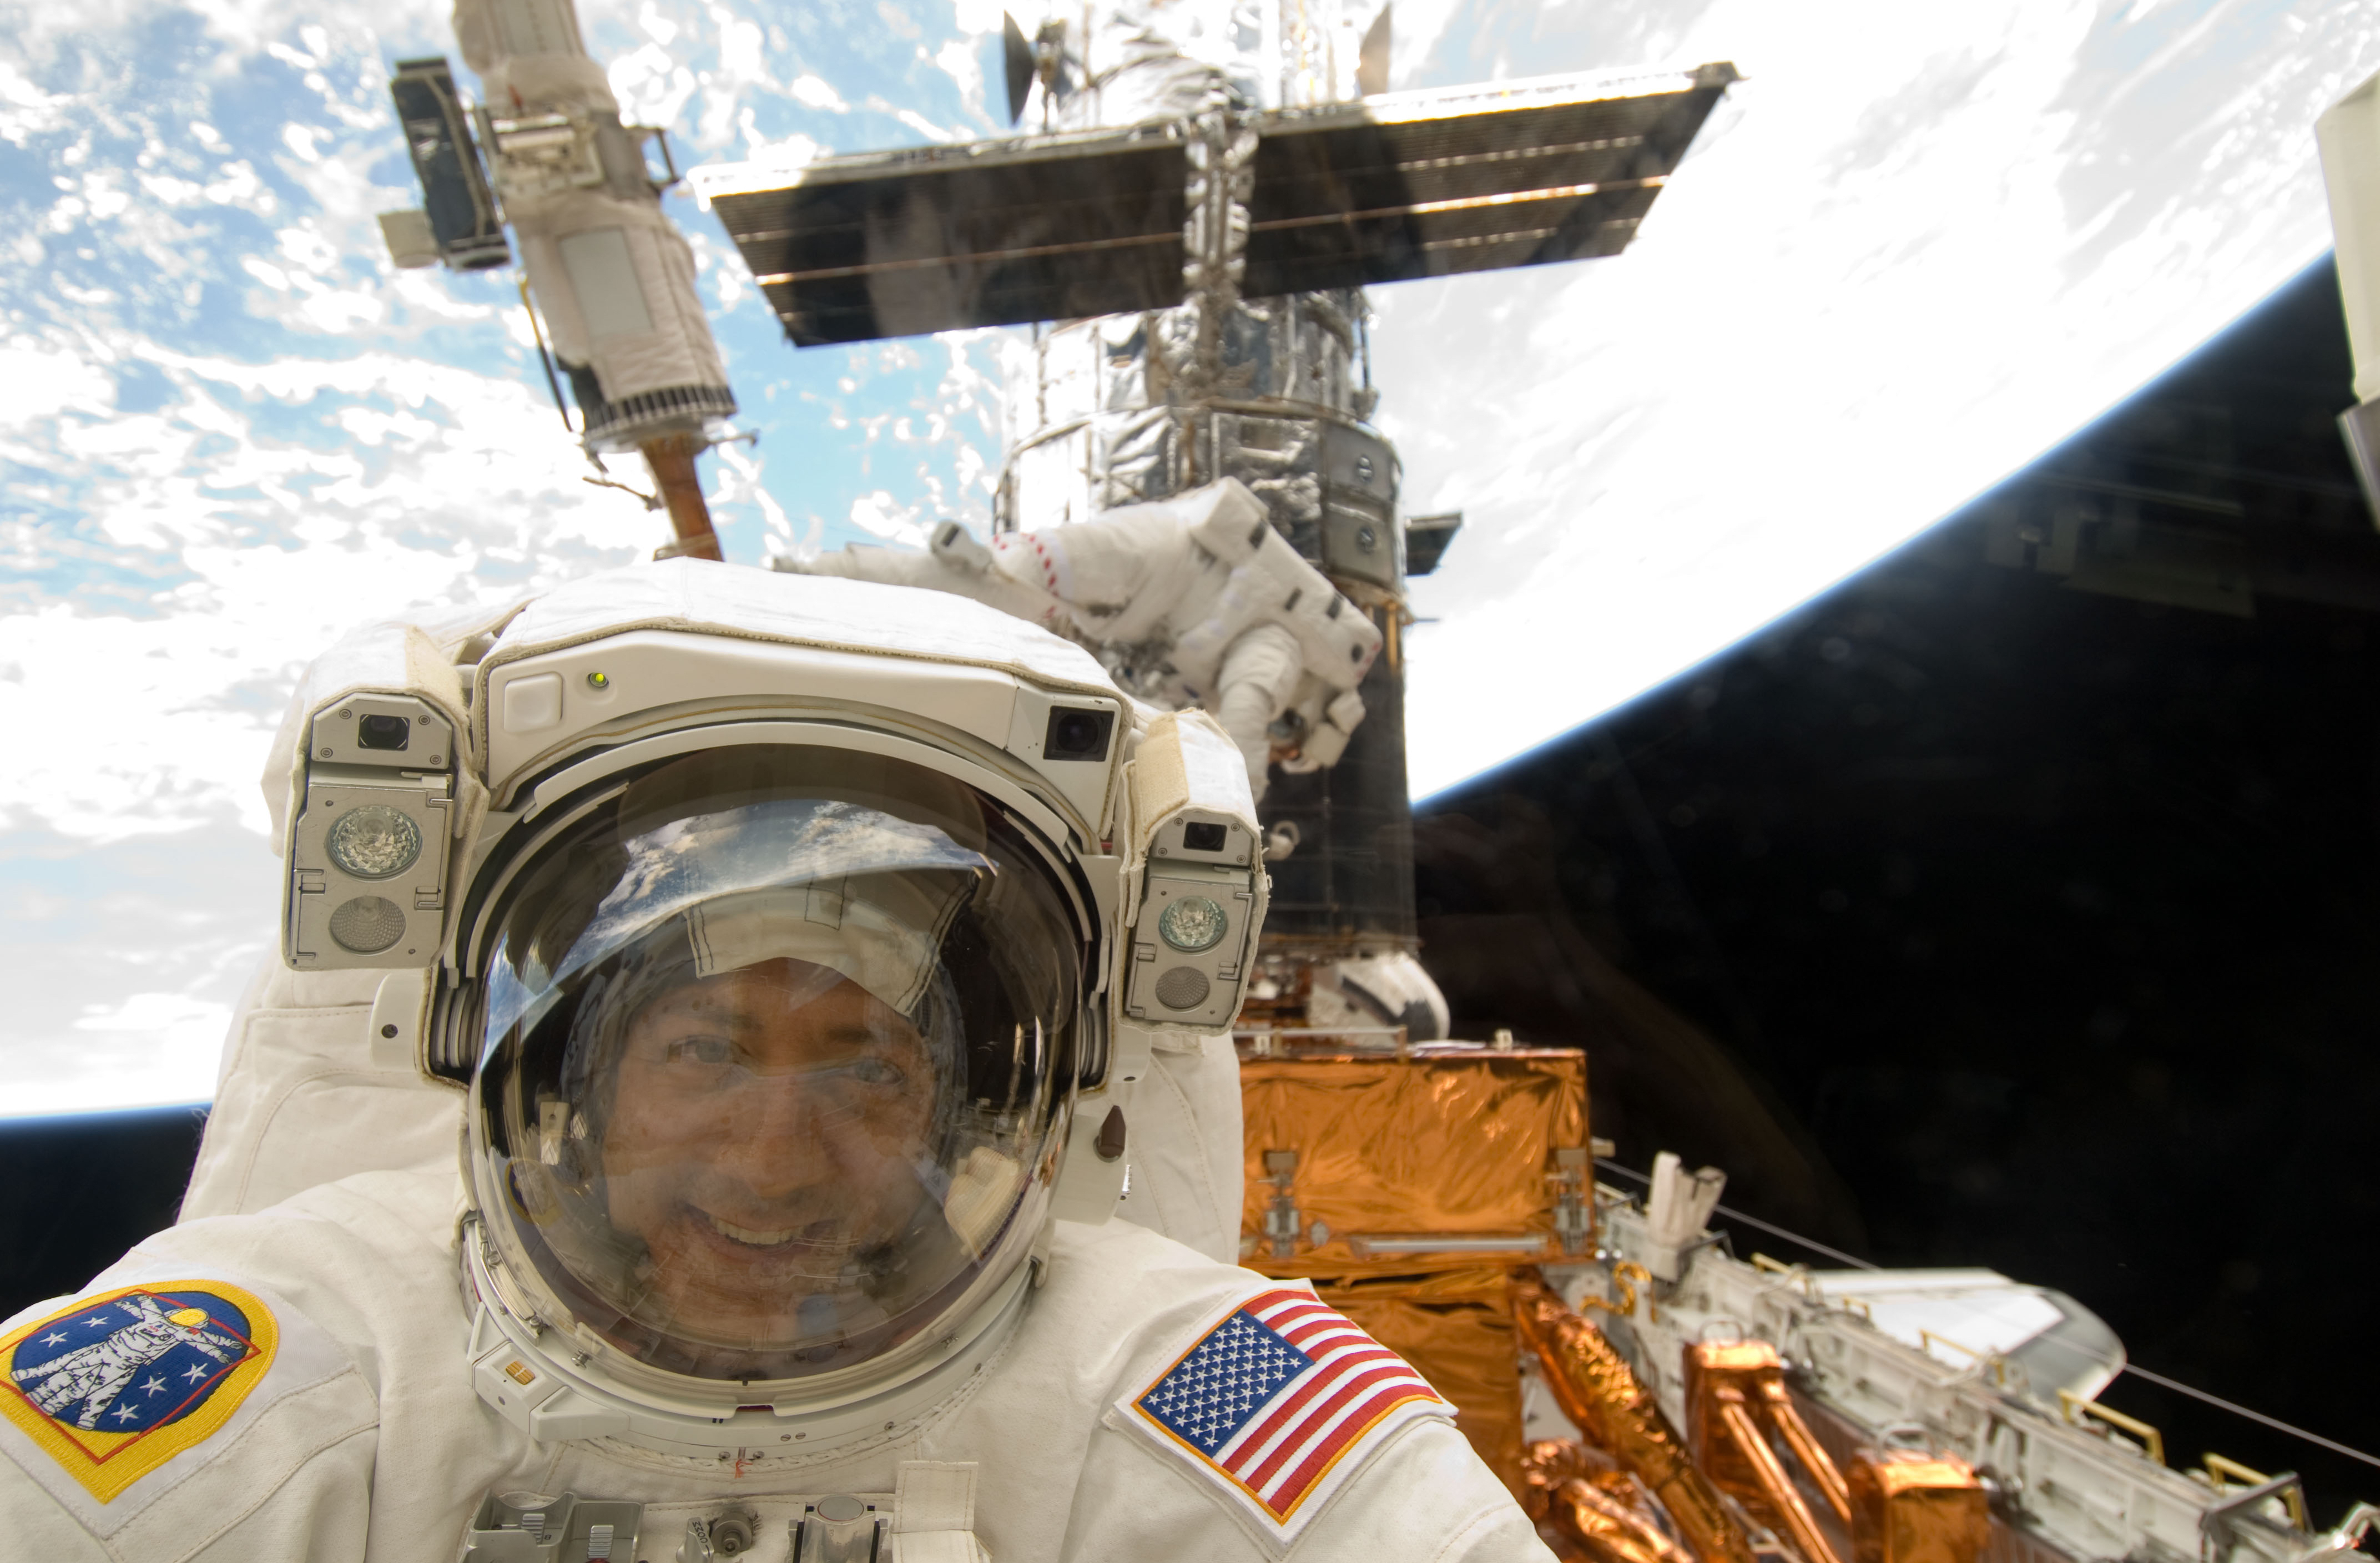 A man in a space suit is taking a selfie.